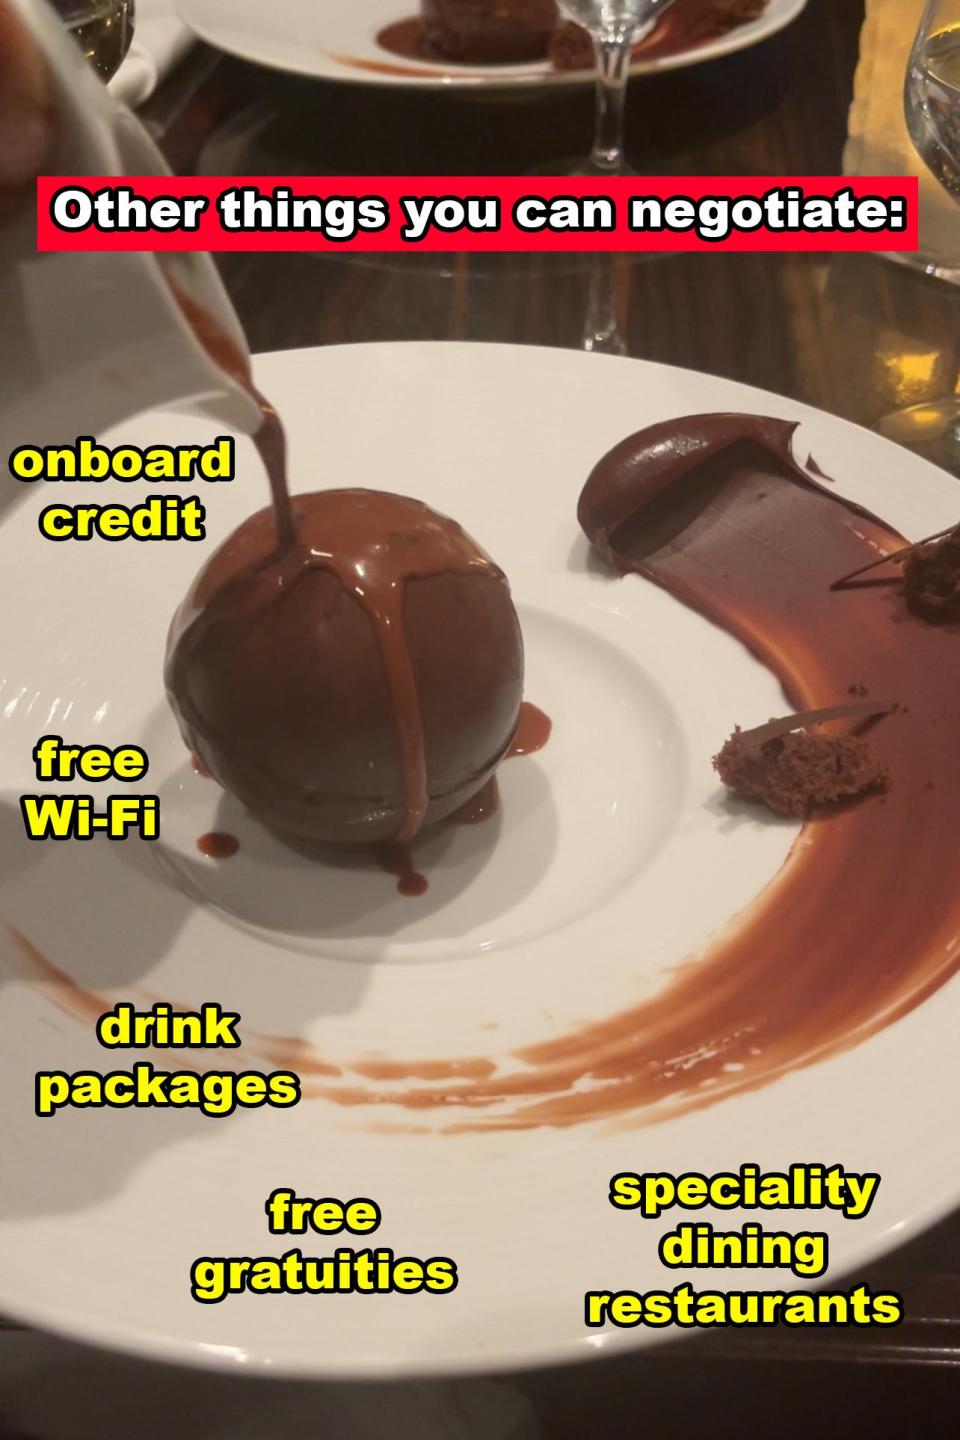 Chocolate dessert being drizzled with sauce, text lists negotiable items like onboard credit and free Wi-Fi